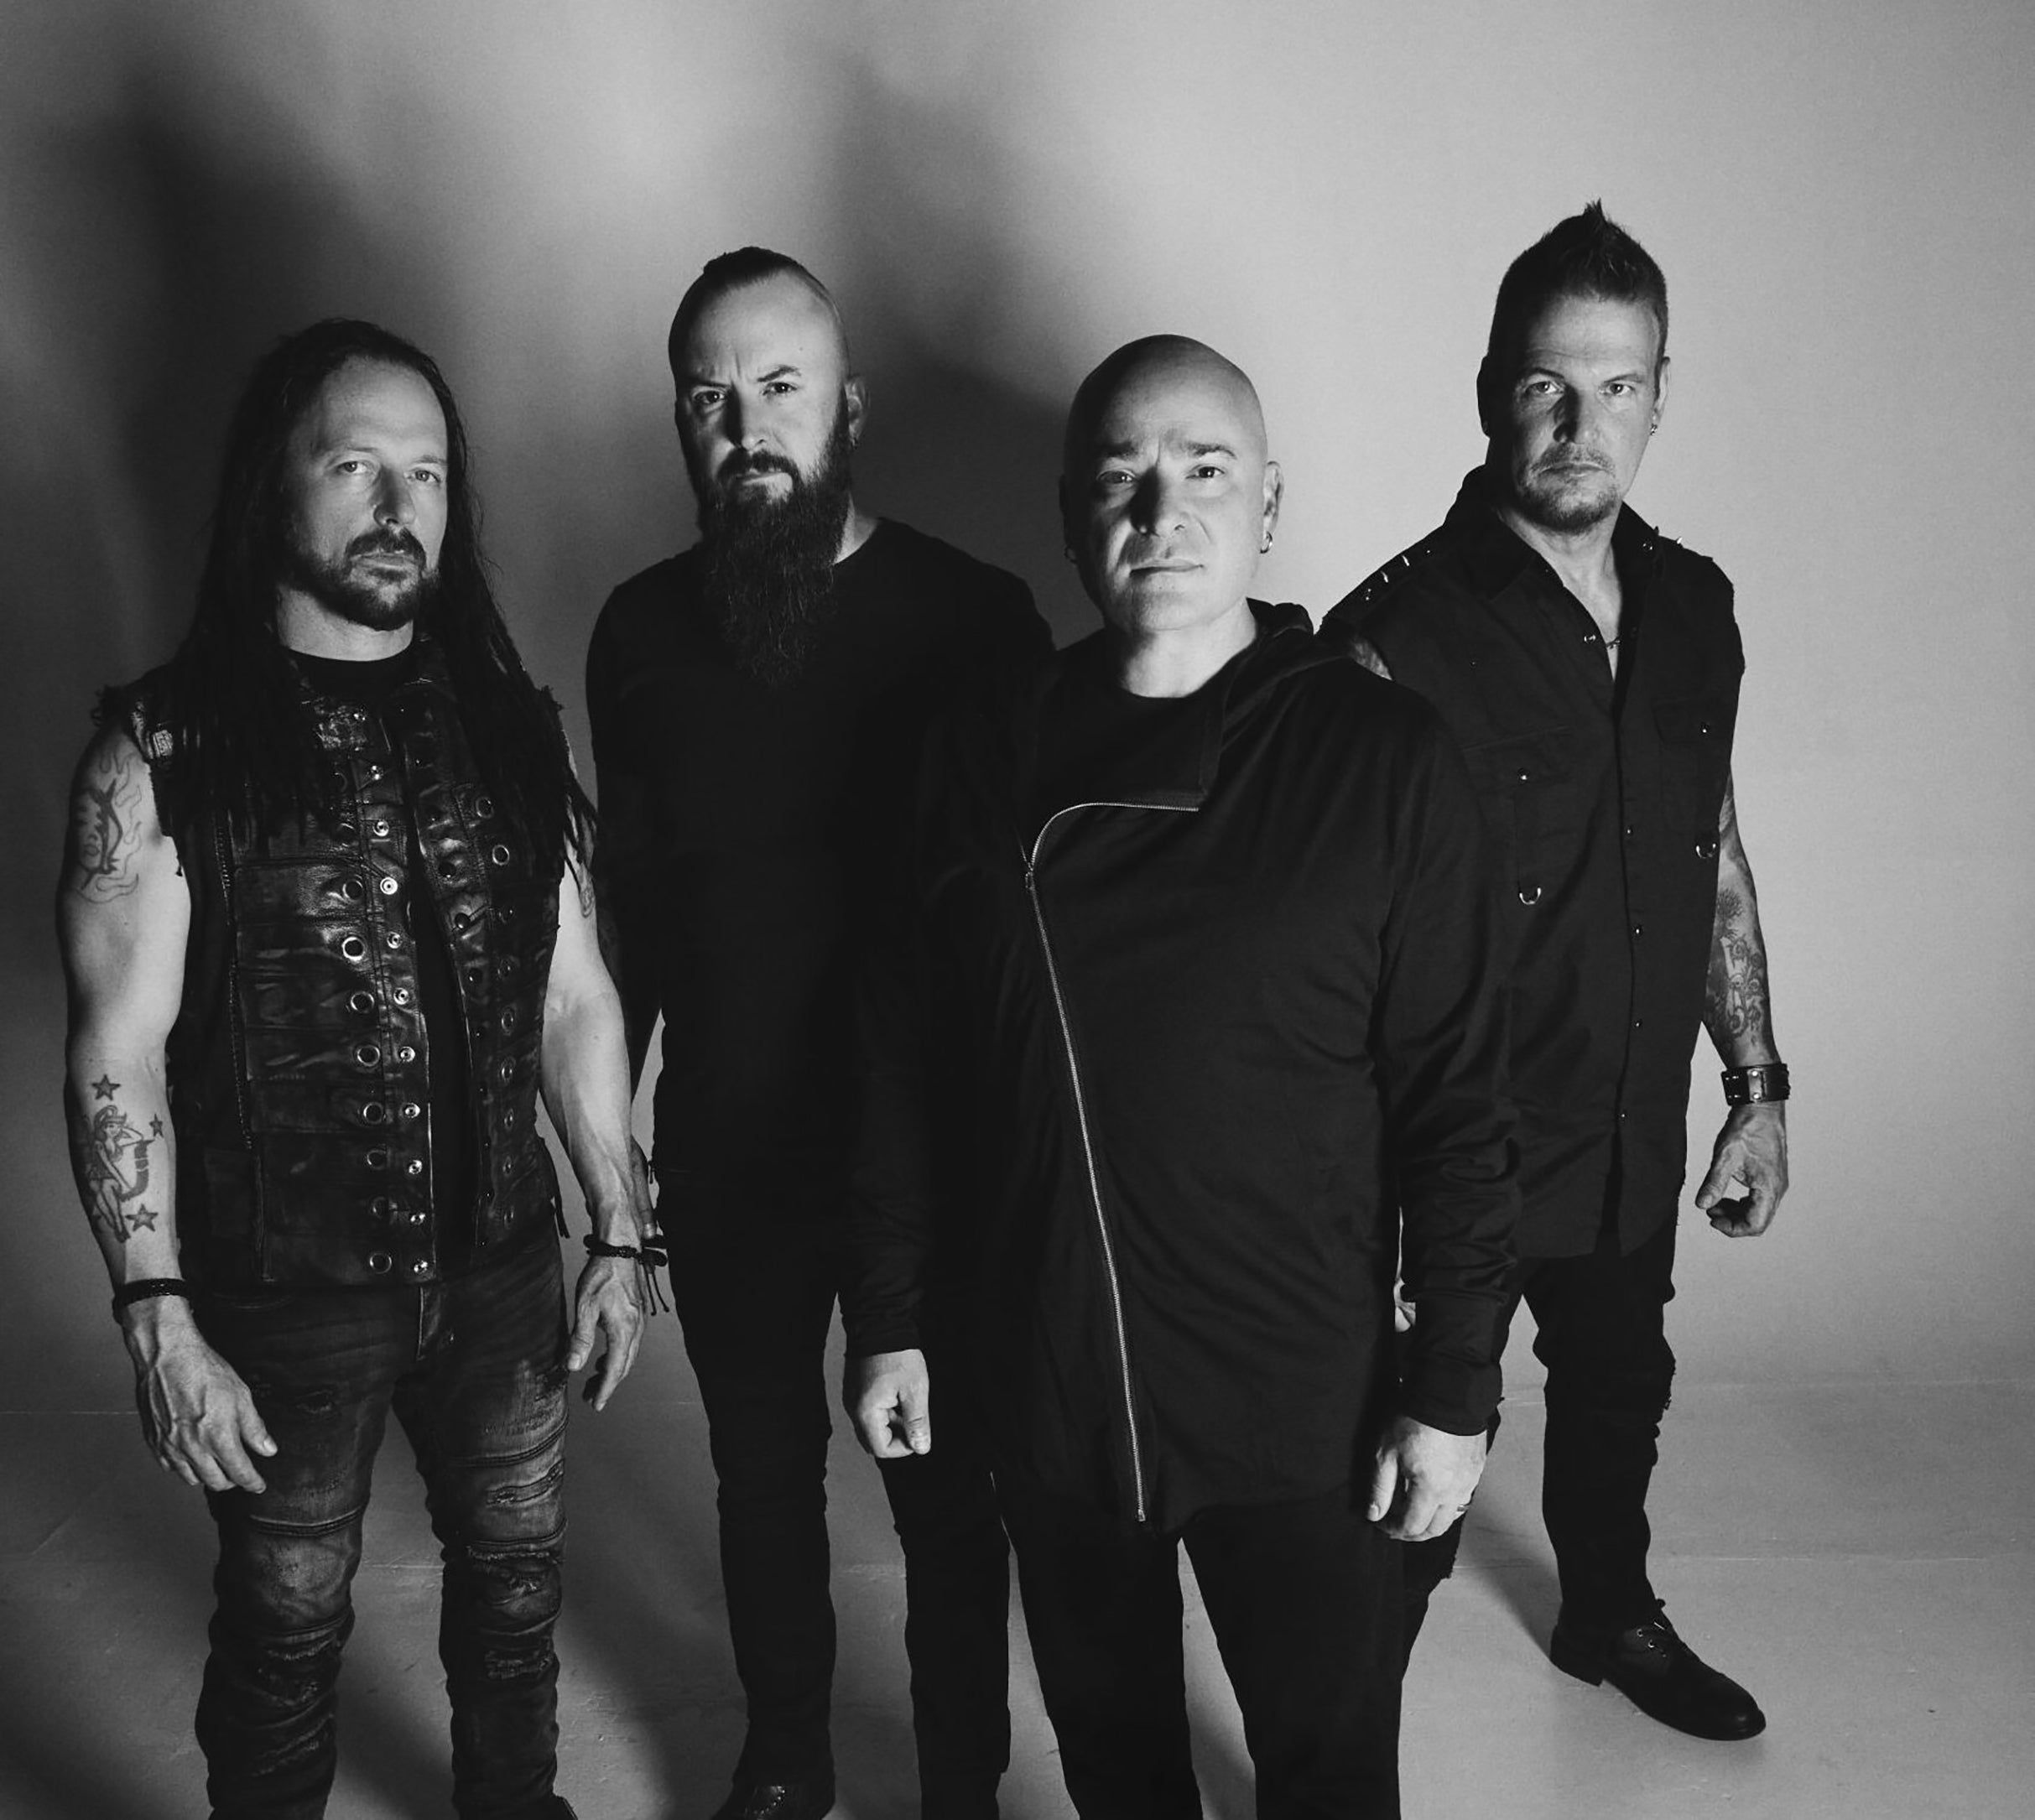 Disturbed: Take Back Your Life Tour free pre-sale code for event tickets in Orlando, FL (Amway Center)